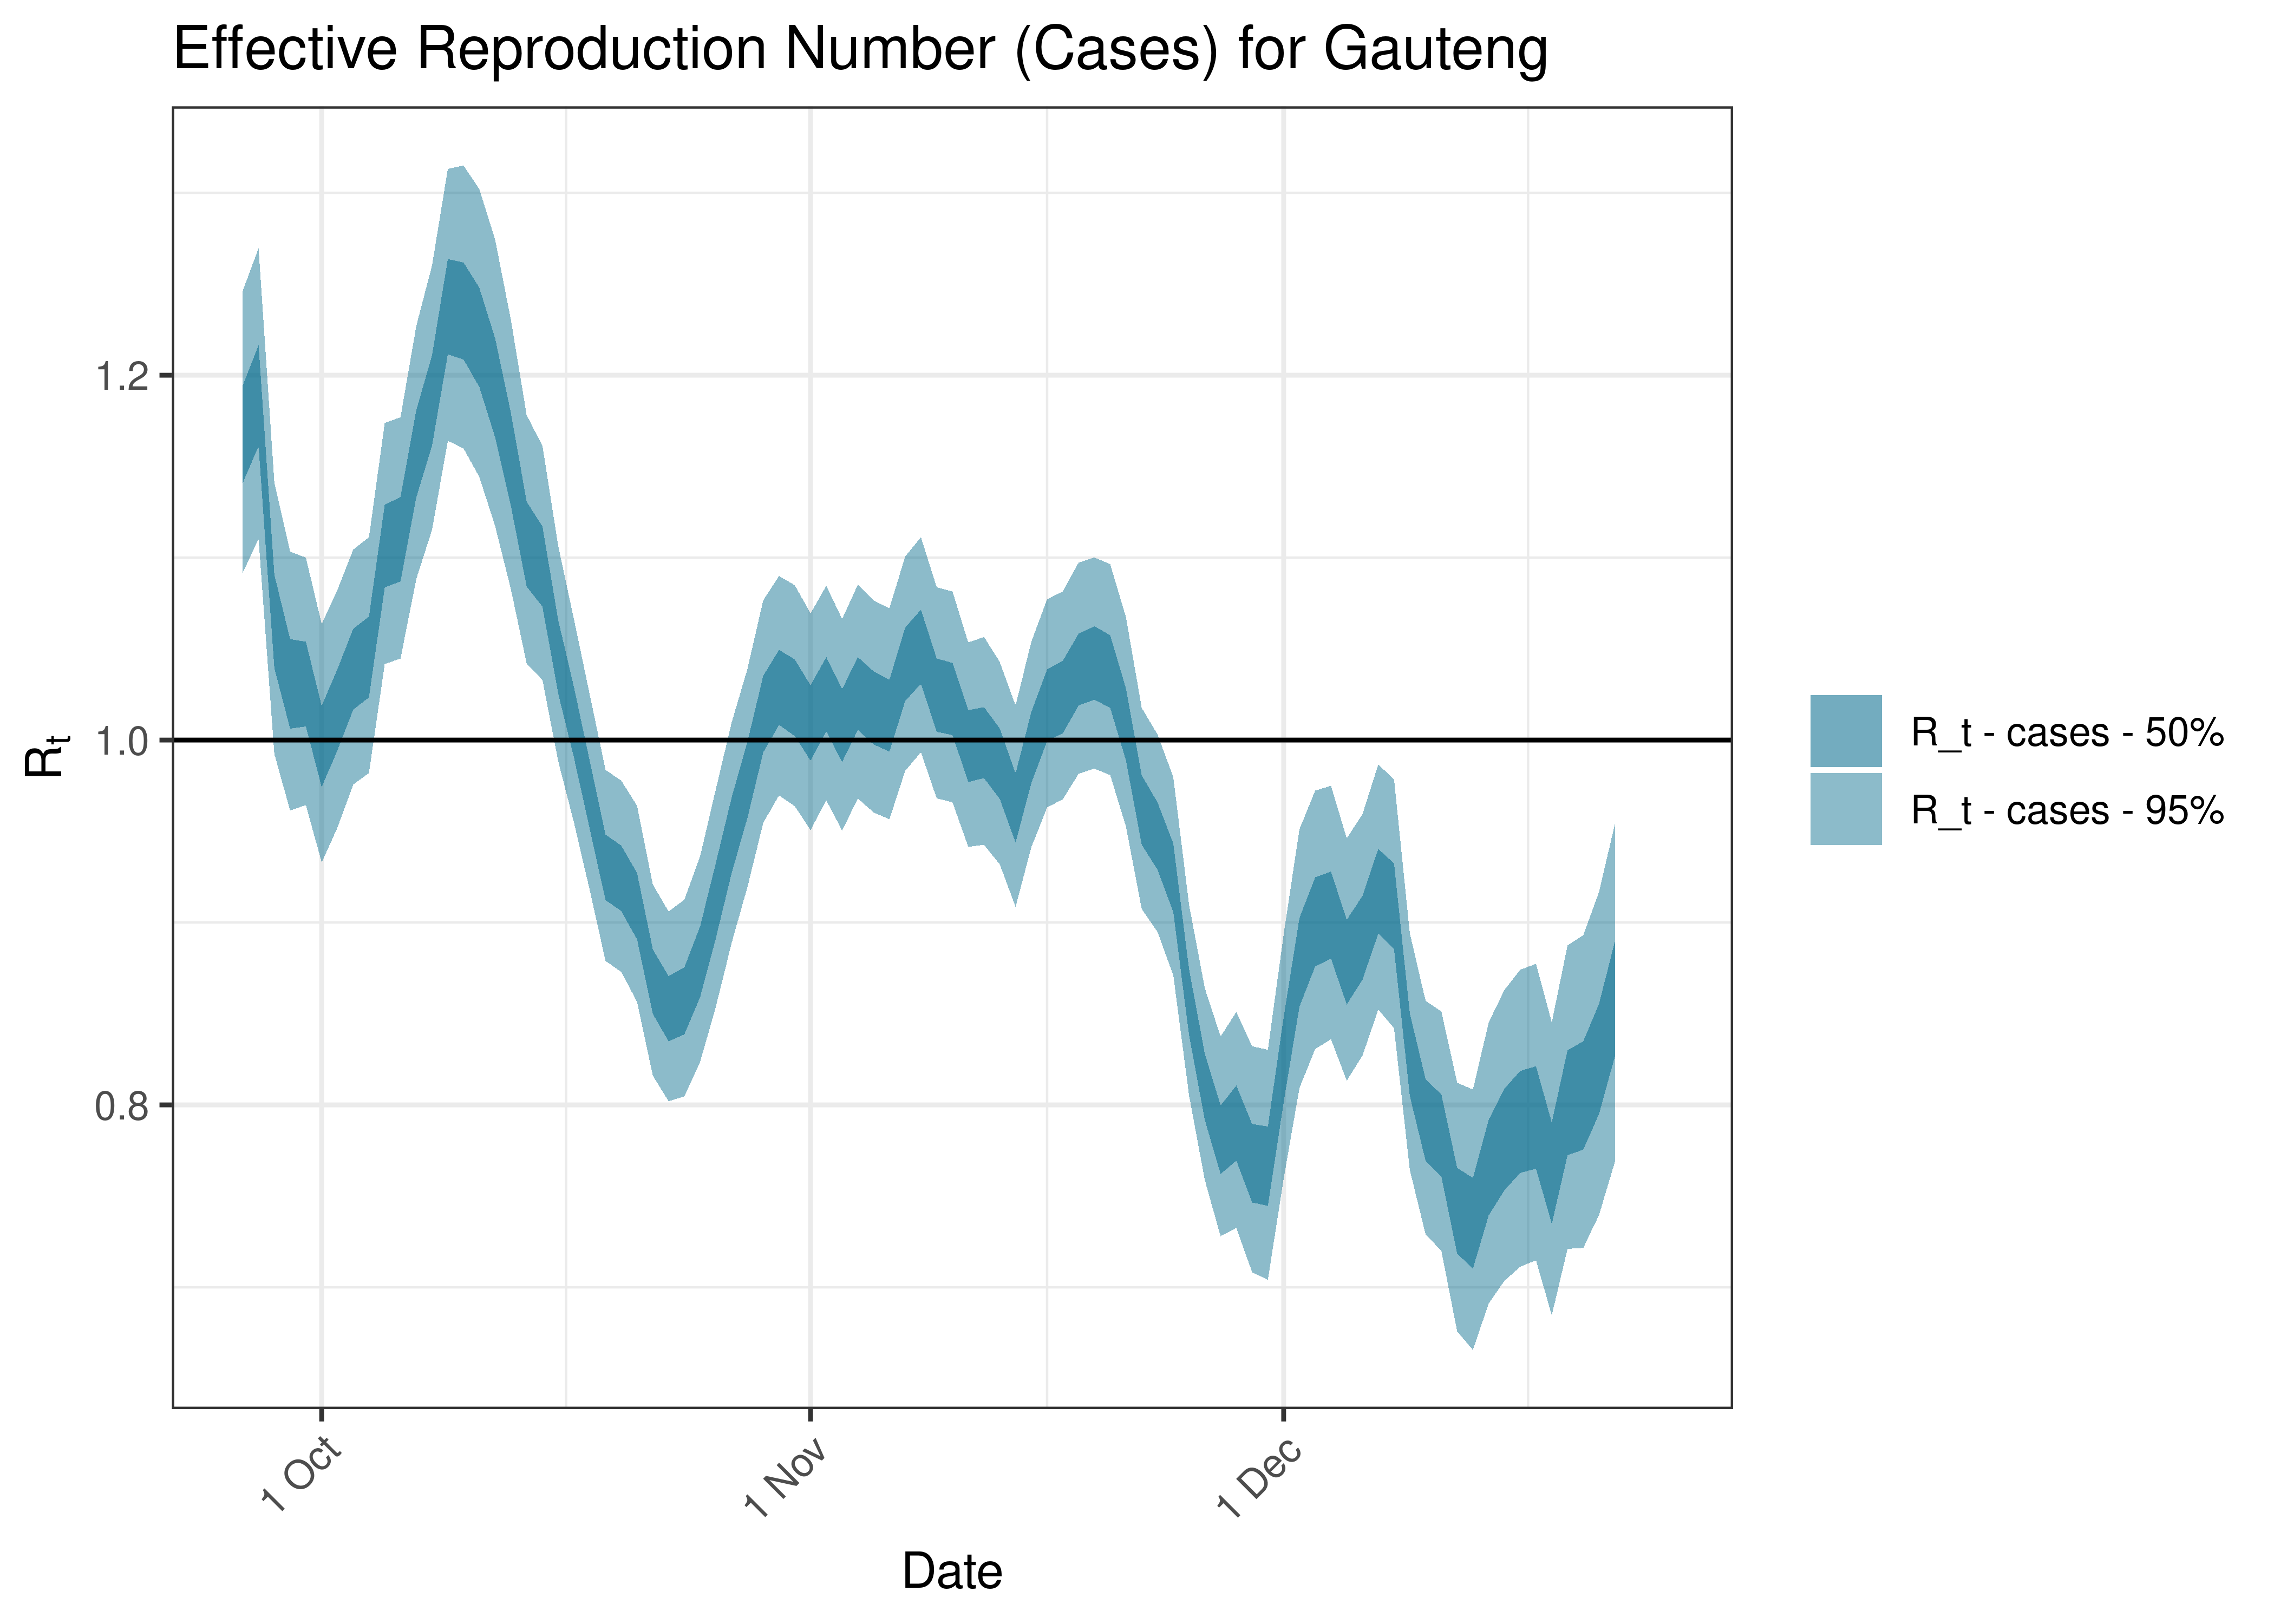 Estimated Effective Reproduction Number Based on Cases for Gauteng over last 90 days